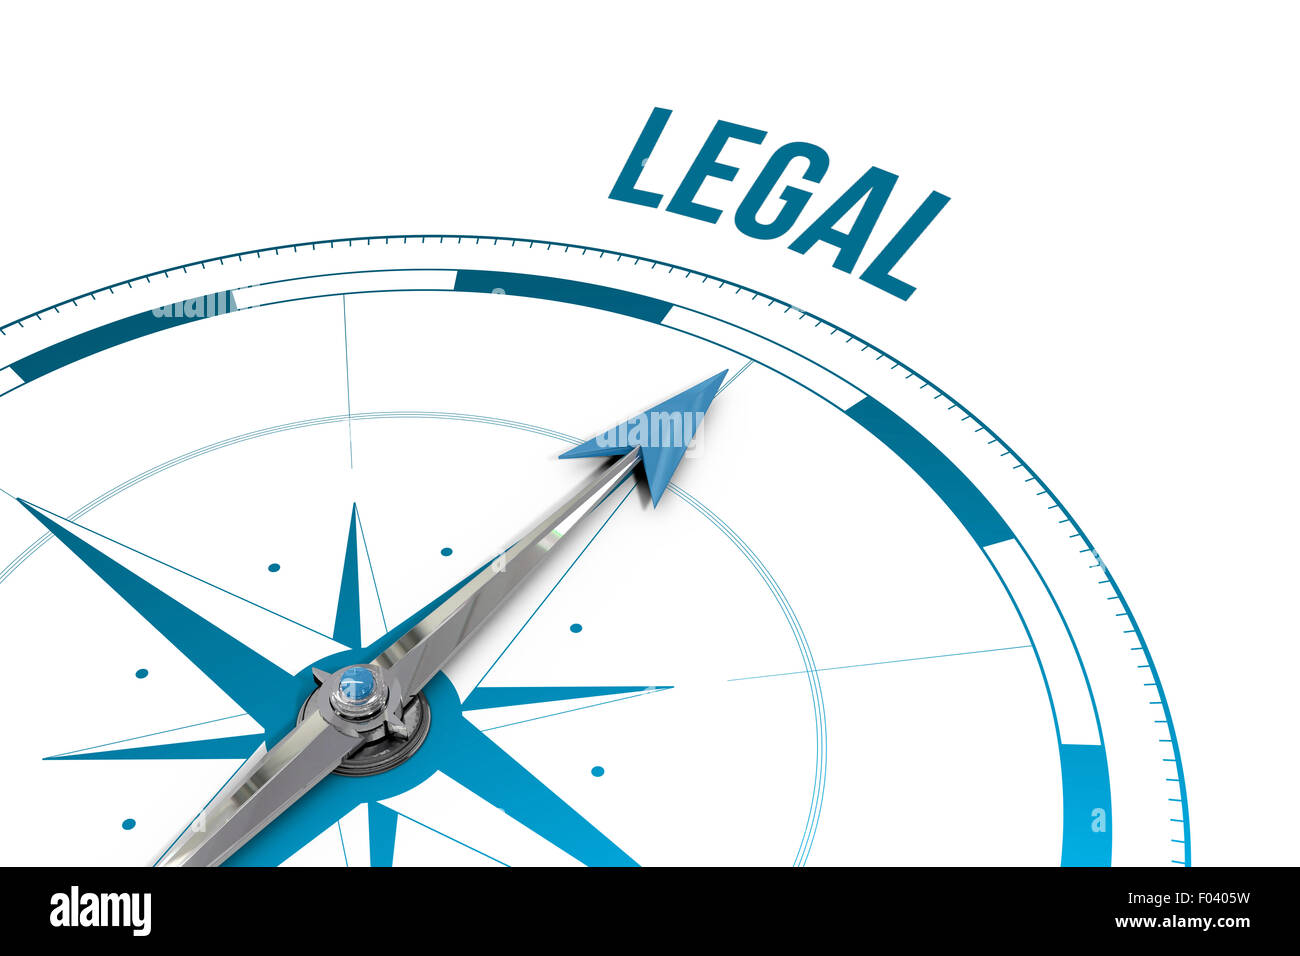 Legal against compass Stock Photo